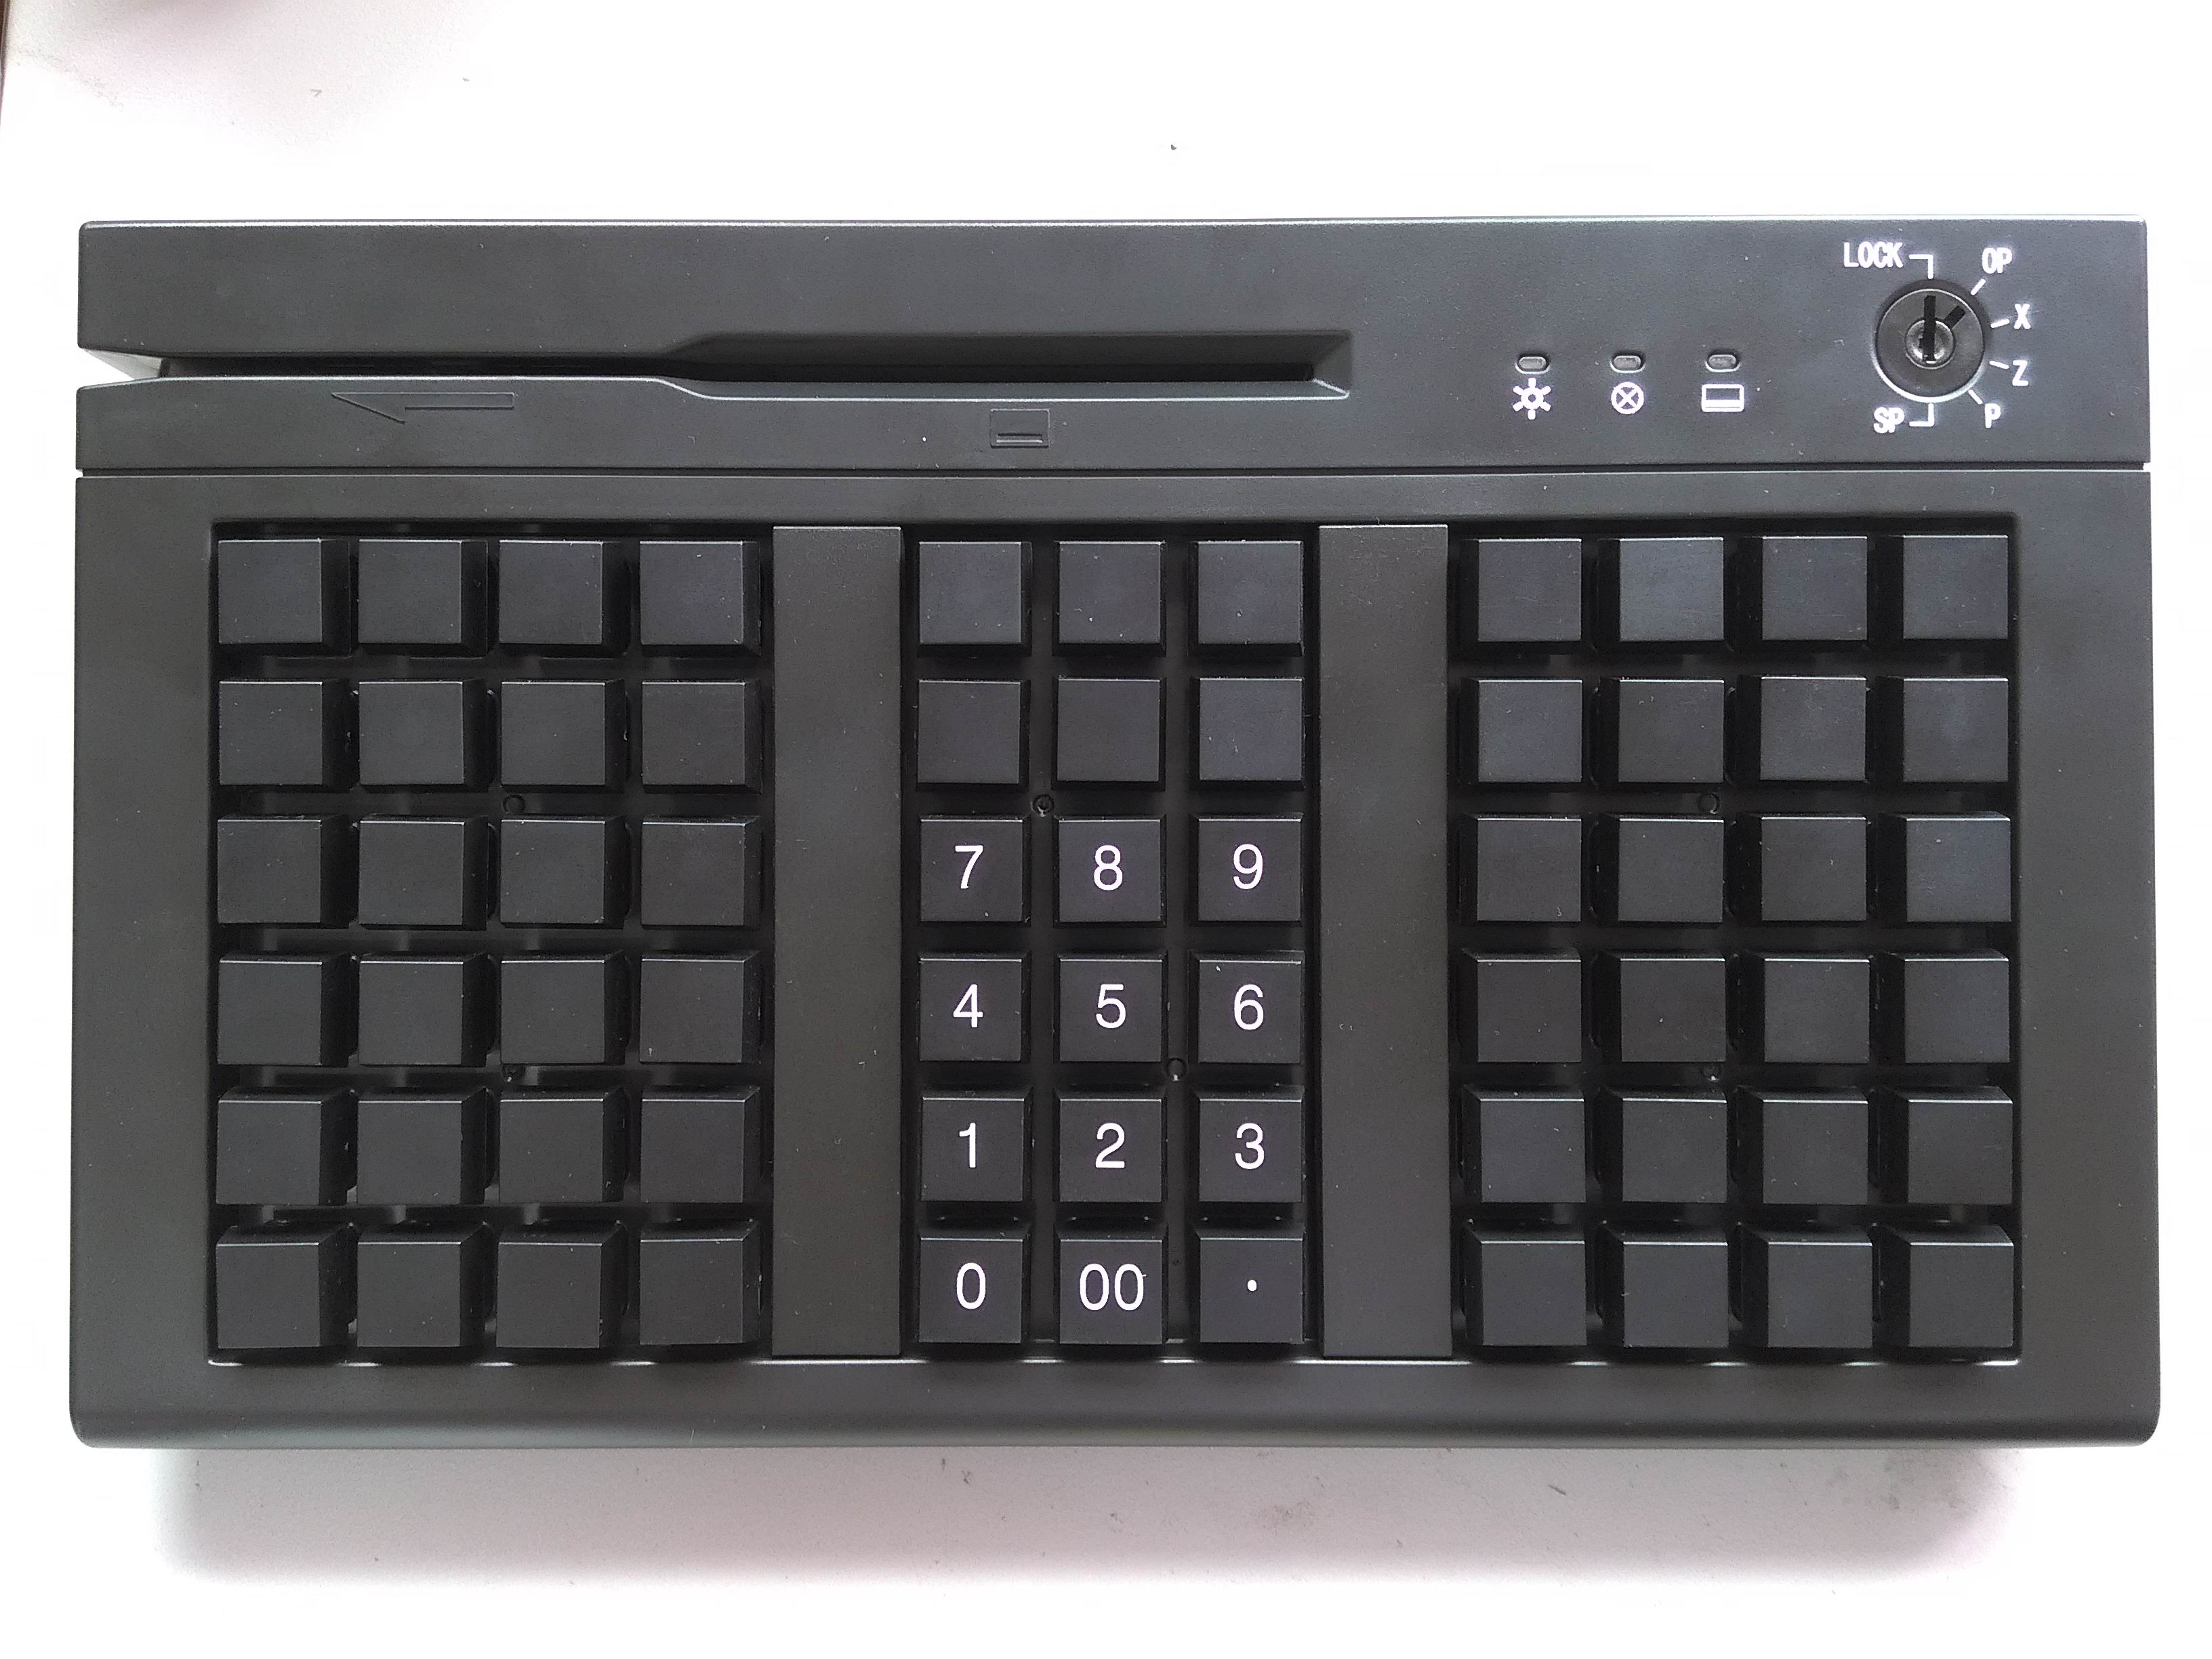 KB60 USB PS2 numeric programmable POS keyboard with msr reader